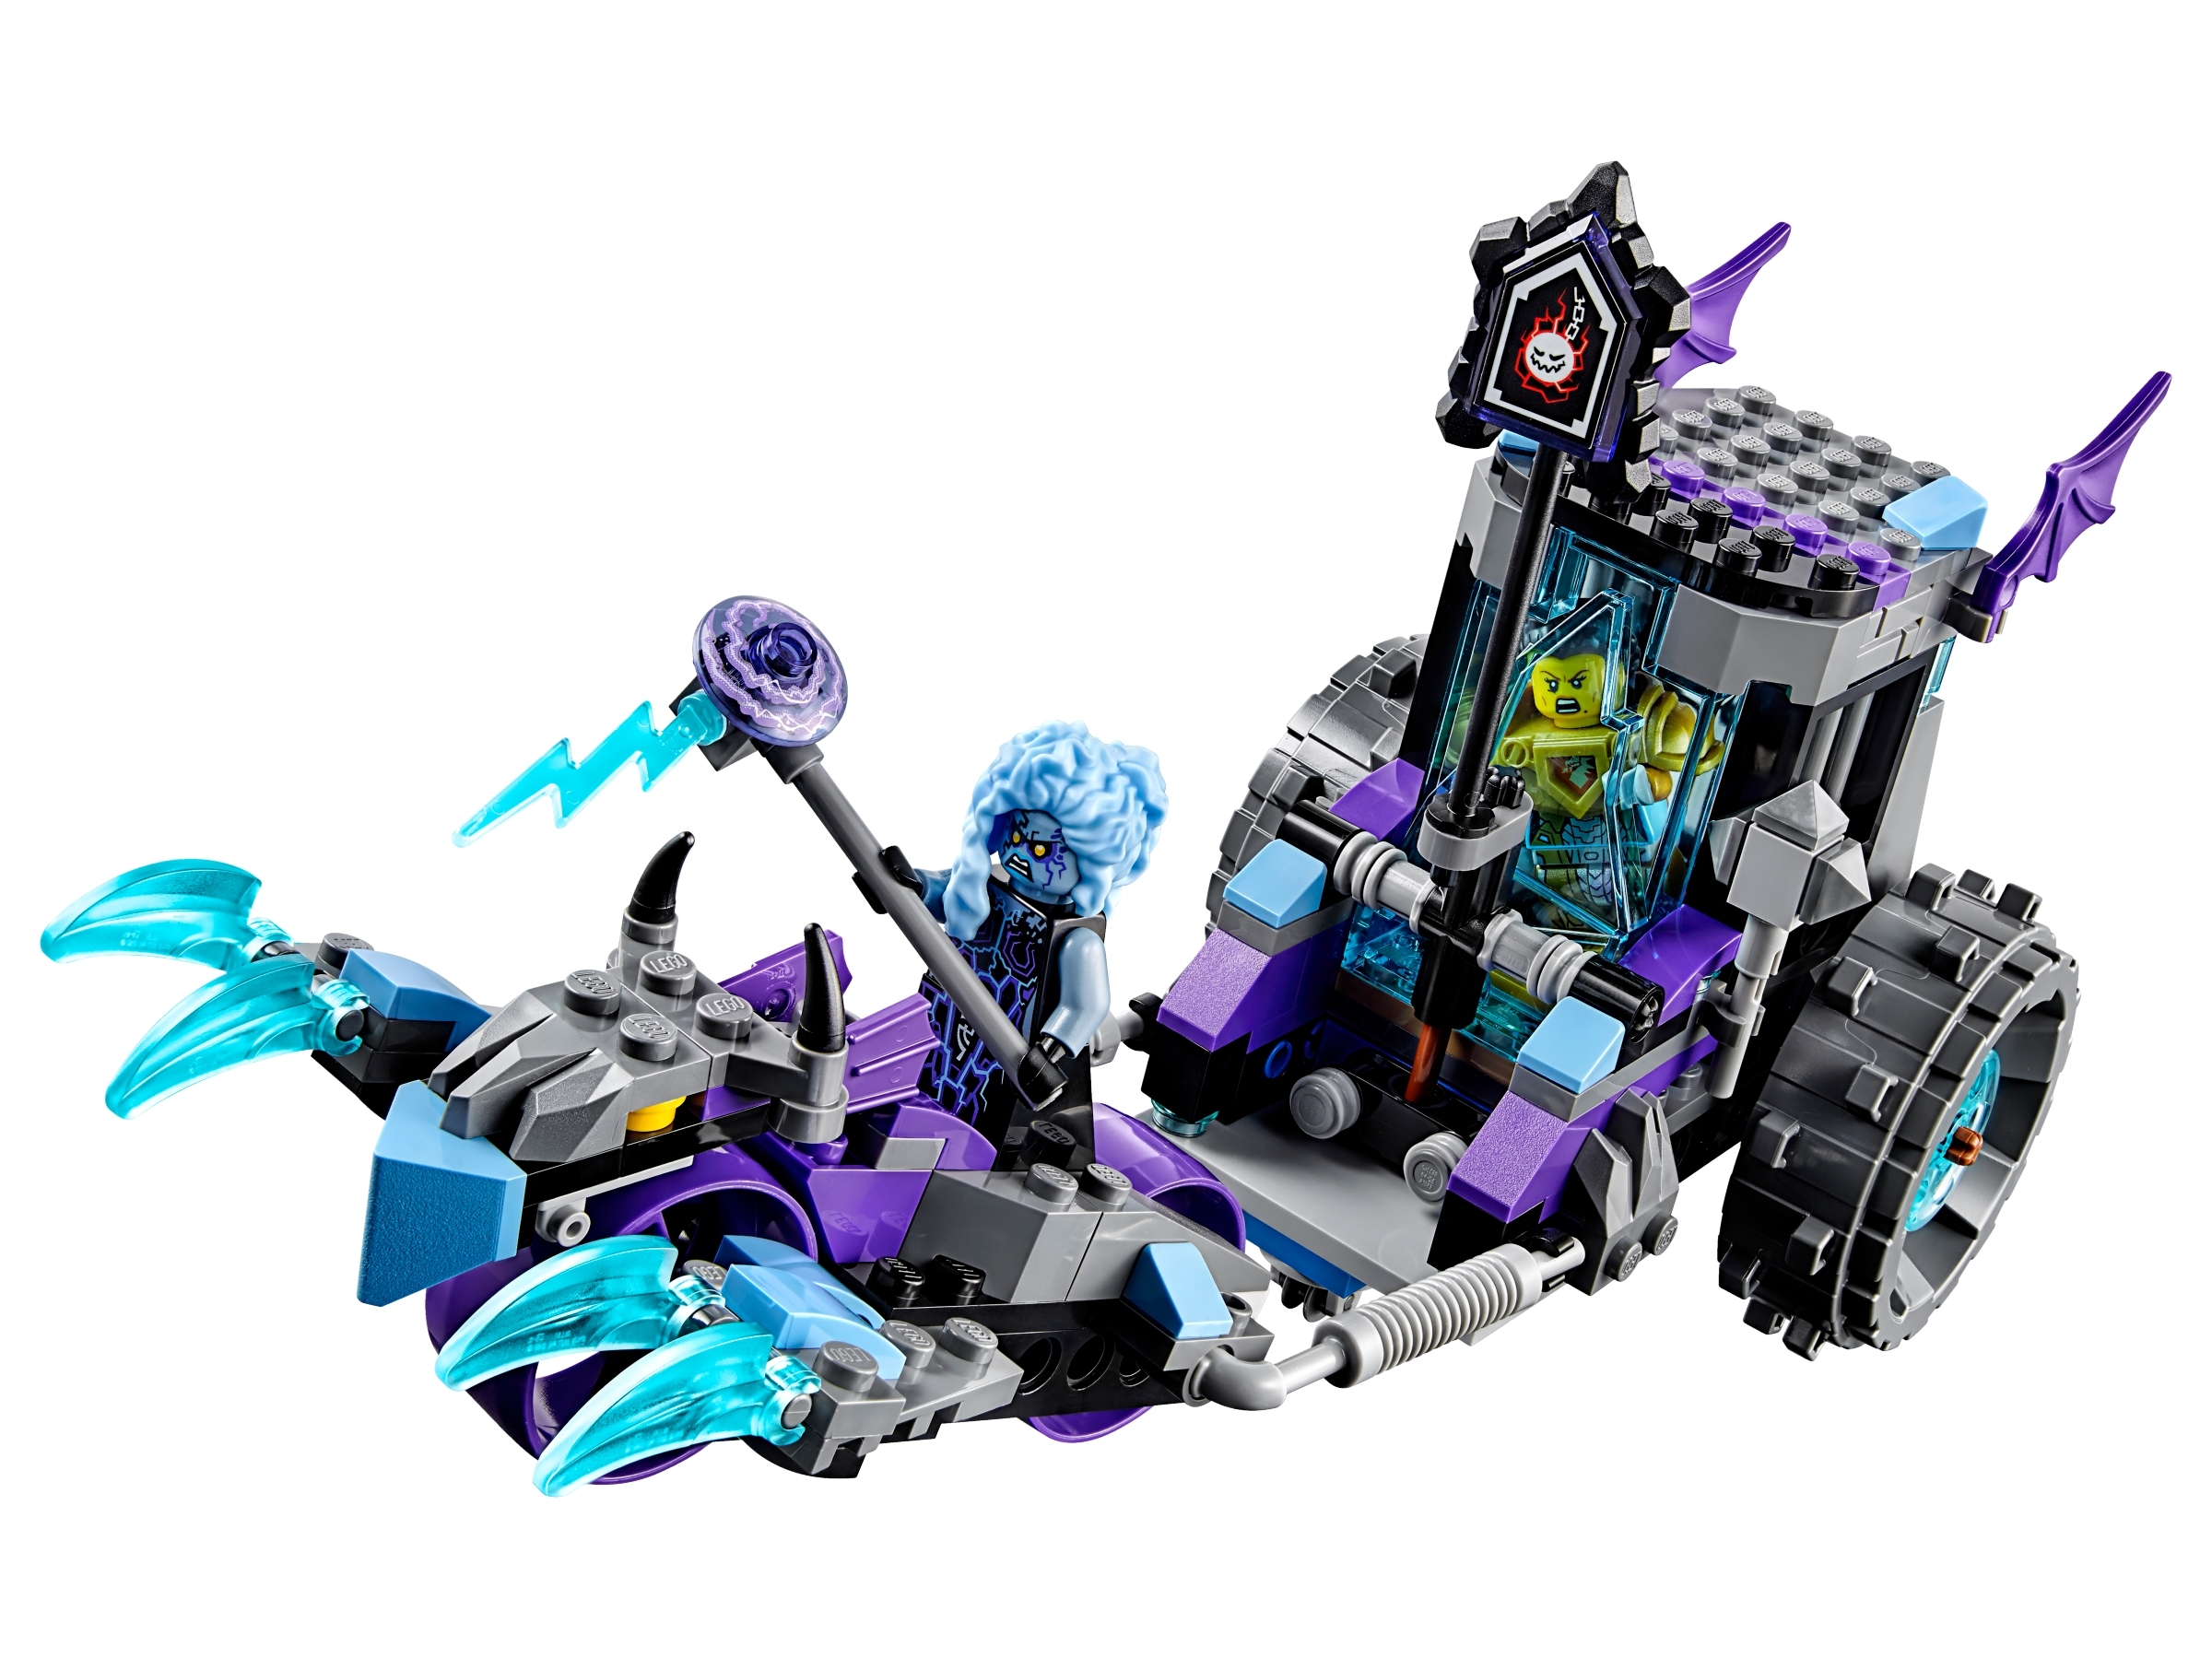 LEGO 70349 Nexo Knights Ruina's Lock and Roller 208 Pcs Rt29 for sale online